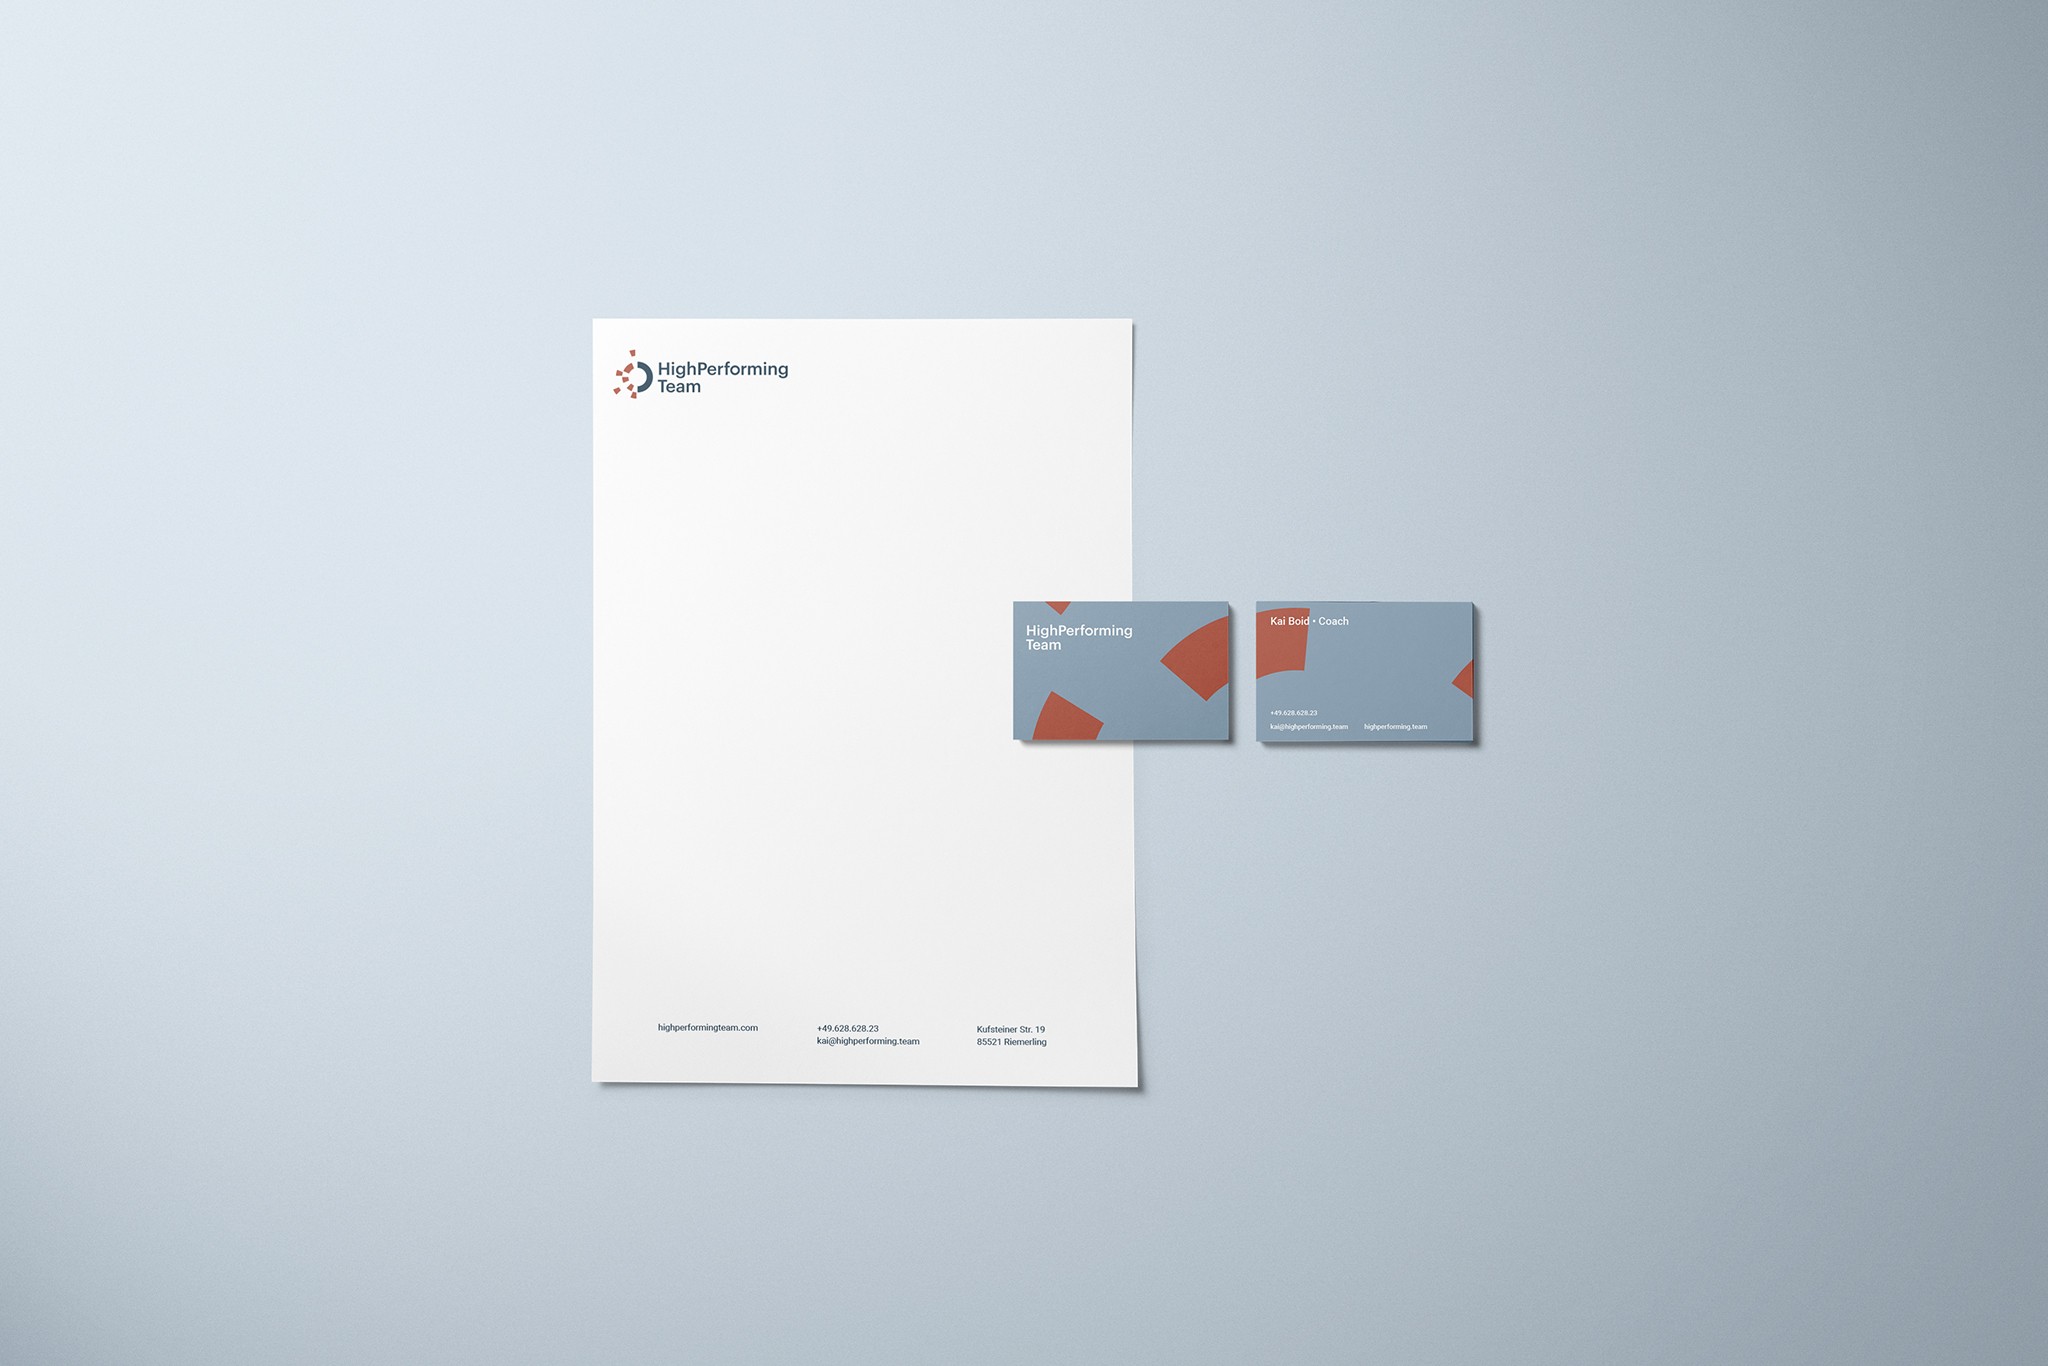 image shows a letterhead and two business cards in the HigPerforming Team design